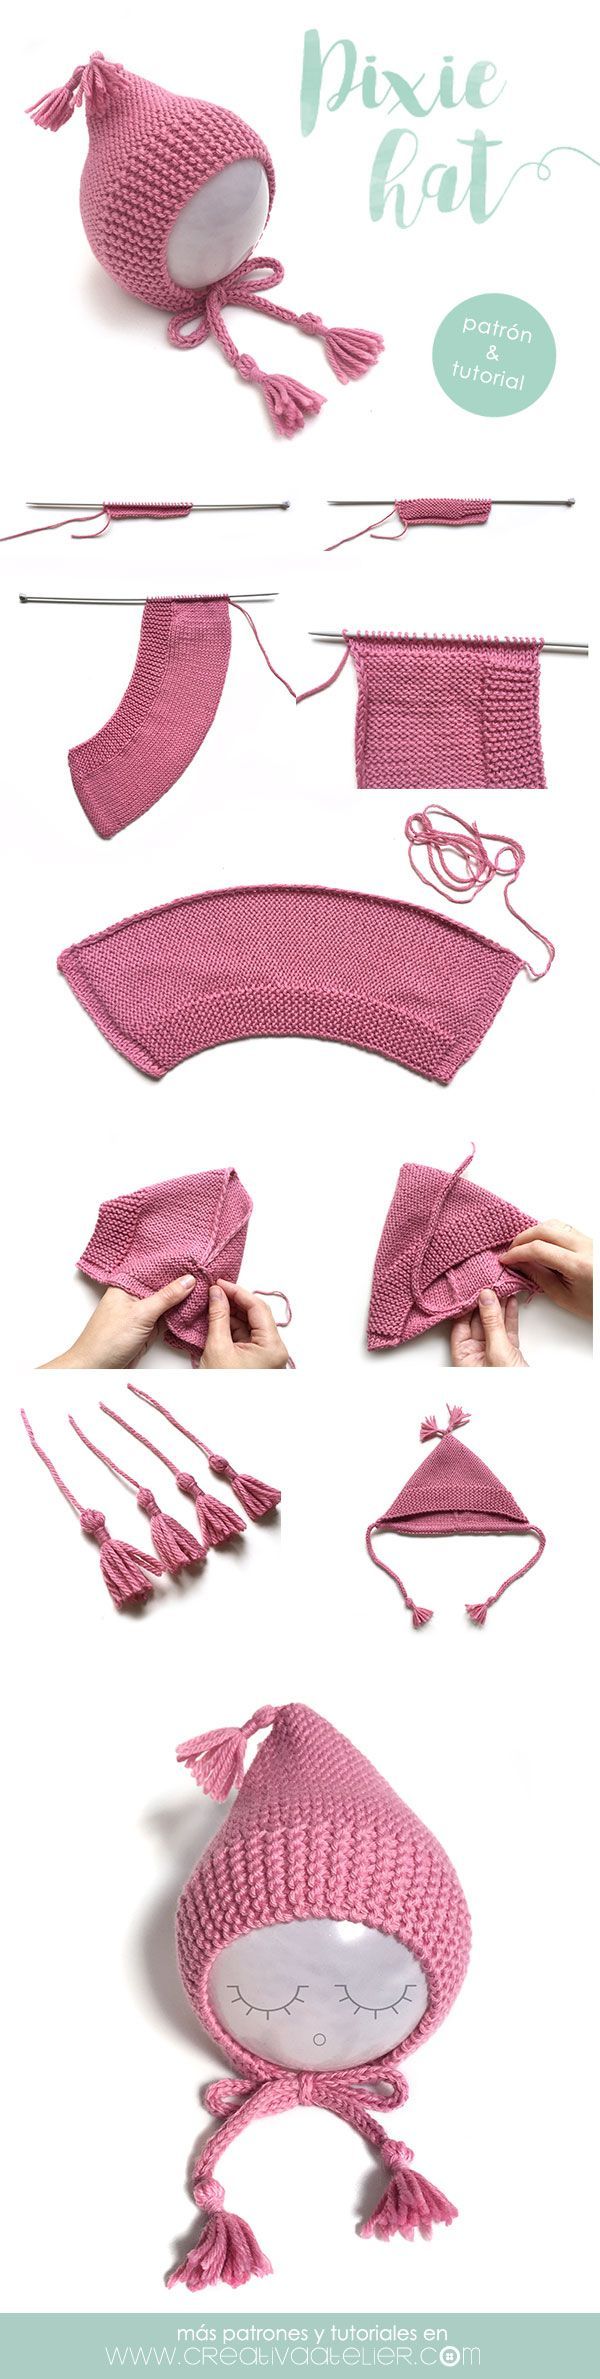 knitted pixie hat. instructions in Spanish